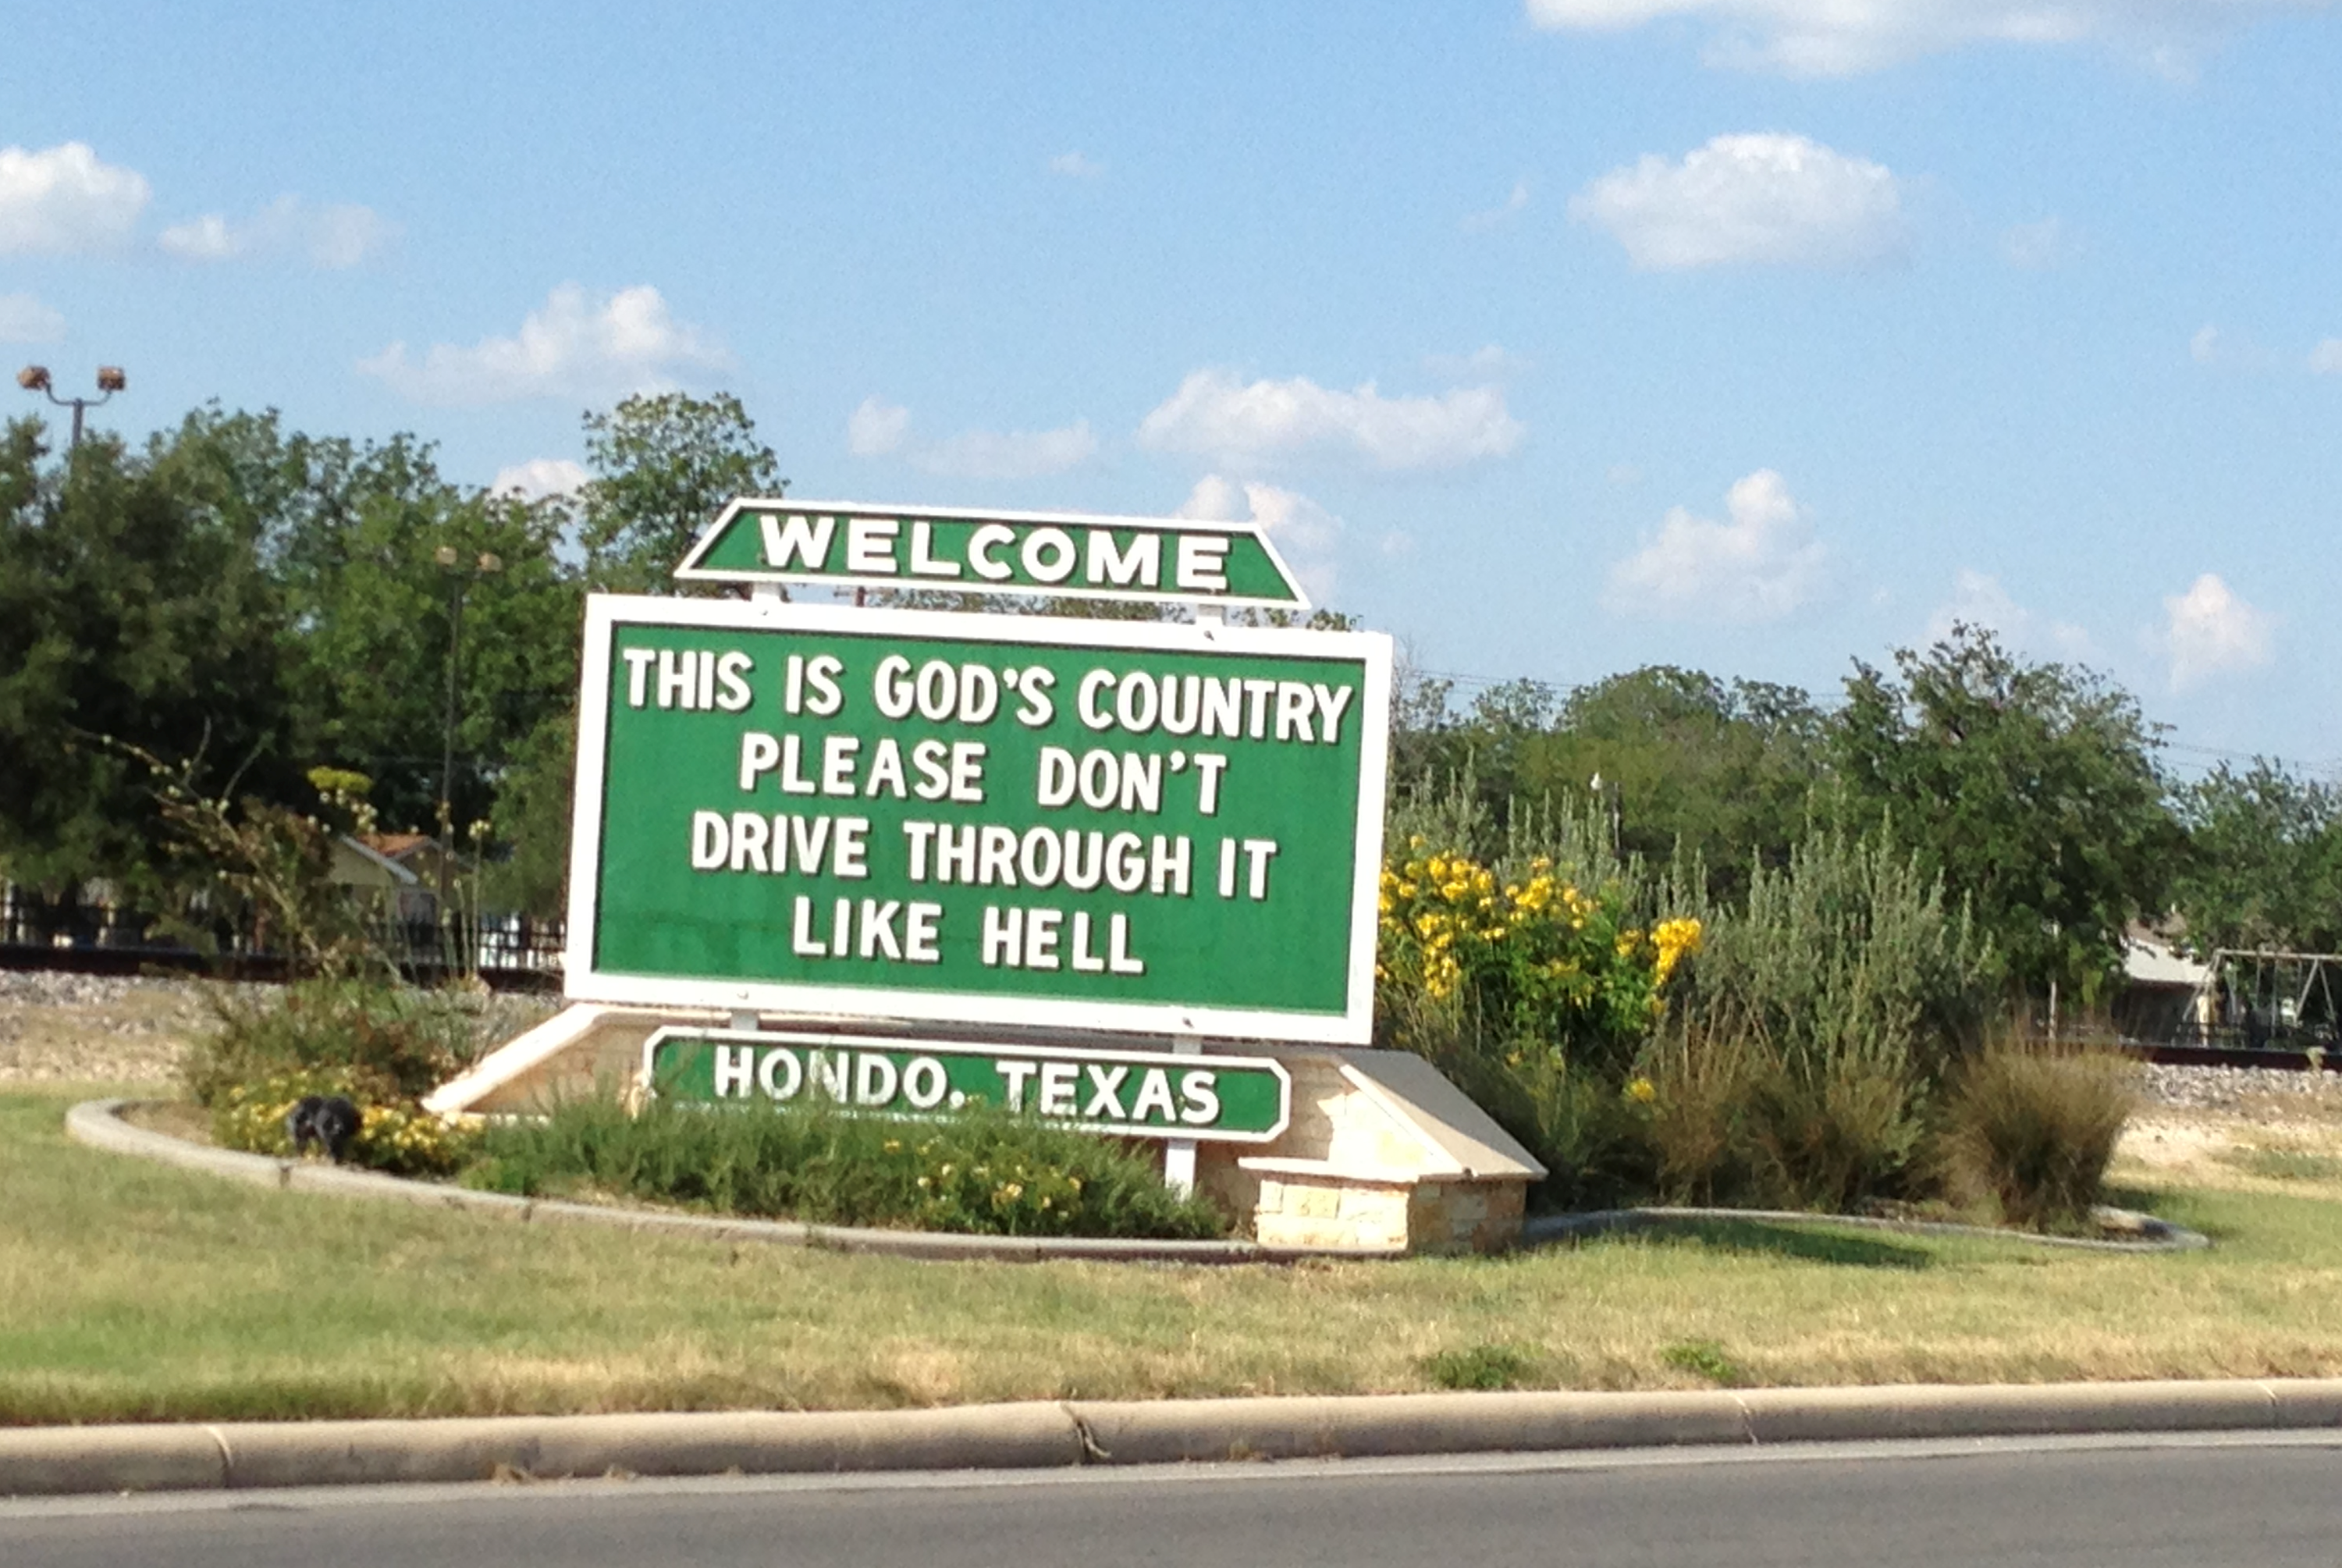 Since 1932, two memorable signs that proclaimed "This Is God's Country - Please Don't Drive Through It Like Hell" greeted people traveling through Hondo, Texas. When Freedom From Religion Foundation representatives asked city officials to remove the signs, Mayor Jim Danner said Monday, "There's no way in hell we're going to take those signs down."